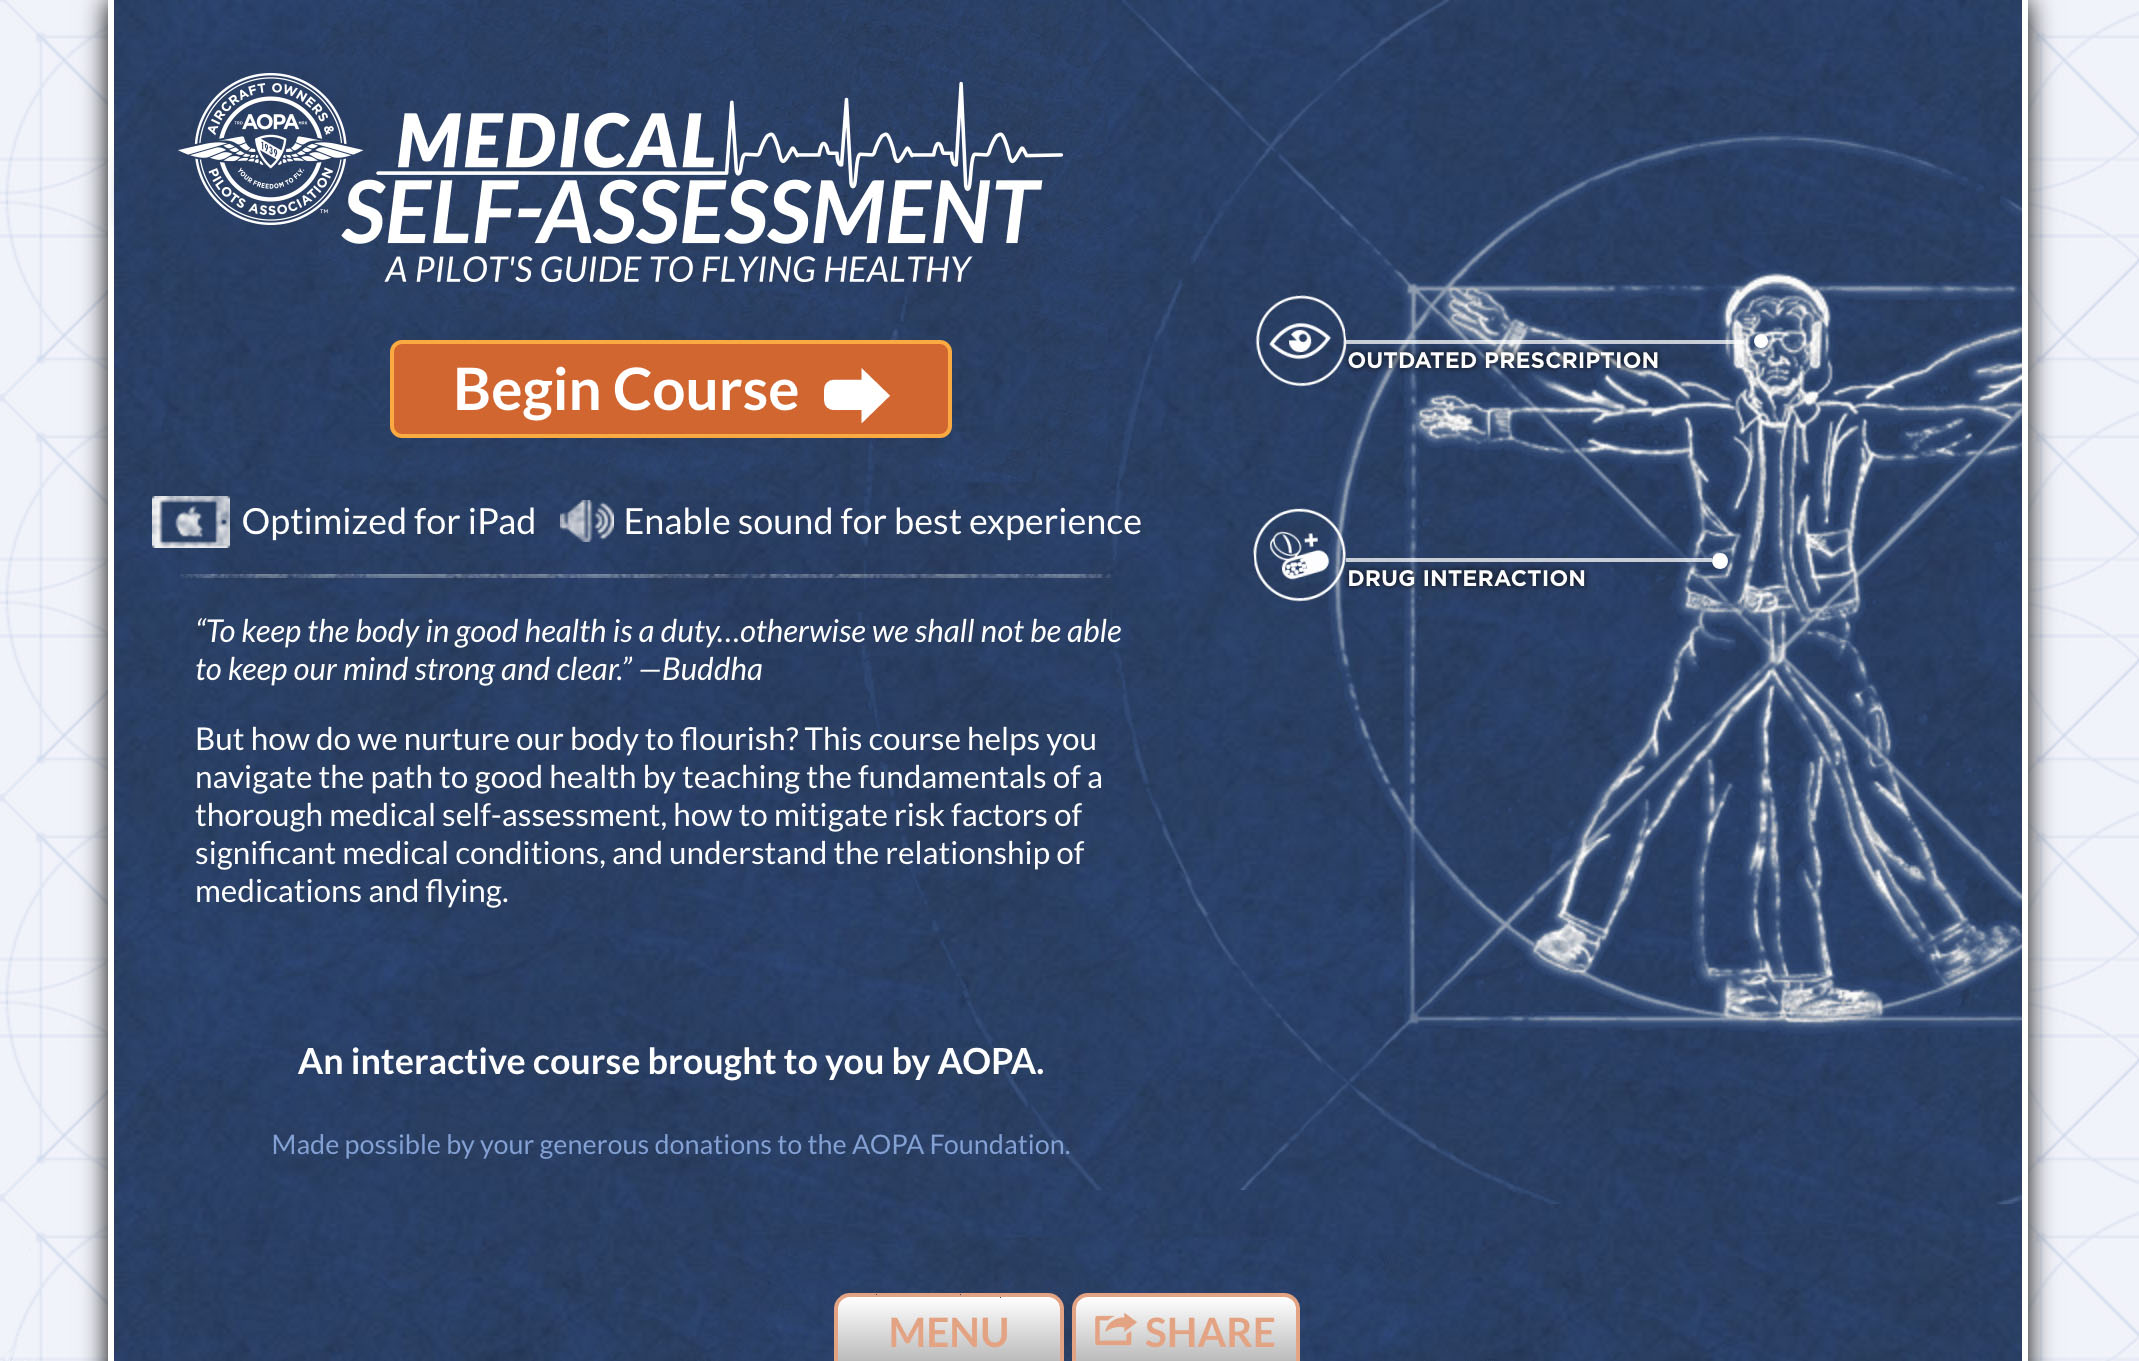 Click here to complete Medical Self-Assessment: A Pilot's Guide to Flying Healthy.